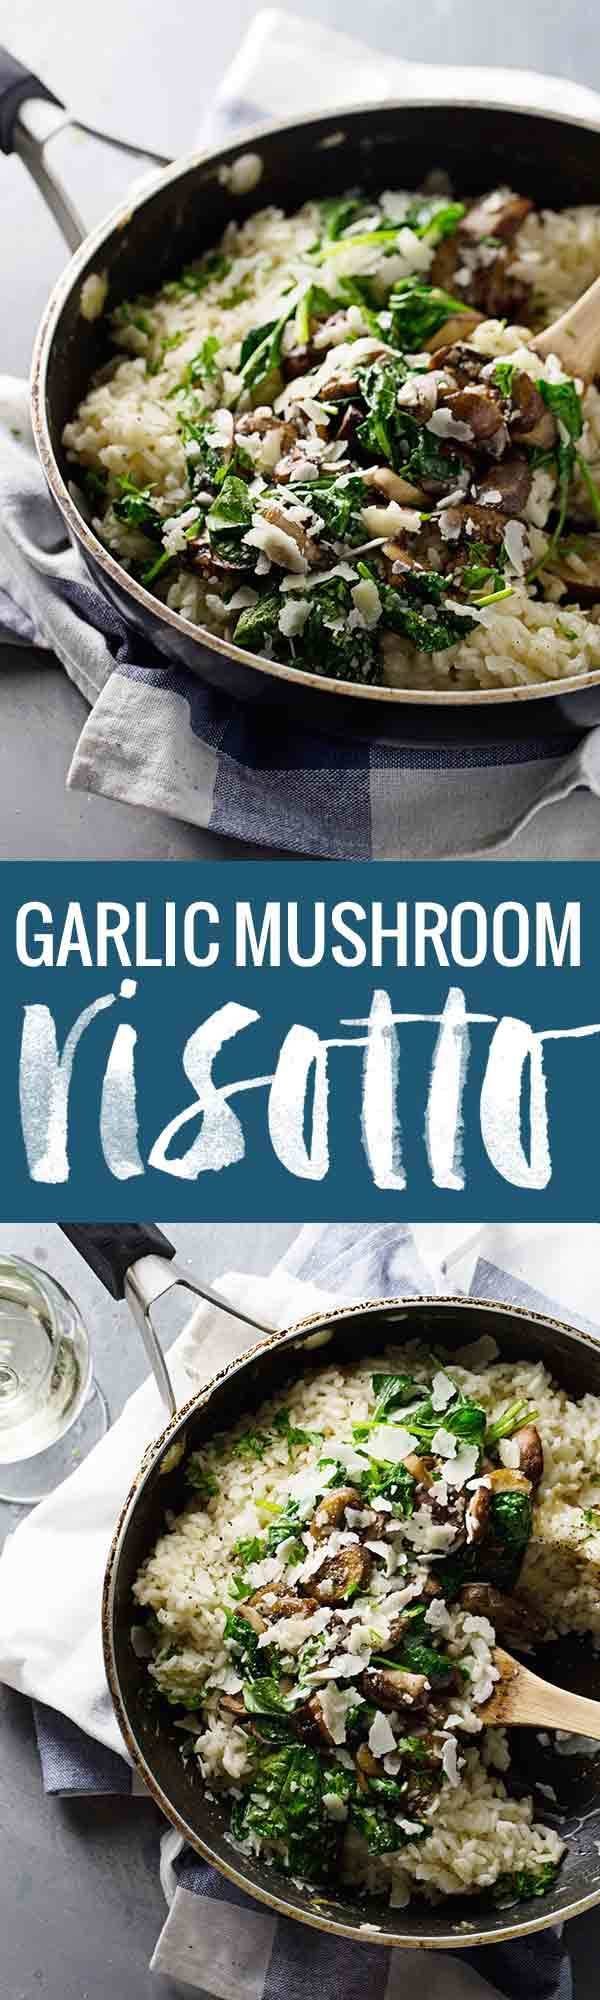 Garlic Butter Mushroom Risotto - super simple! white wine, garlic, mushrooms, butter, spinach, and creamy risotto. 370 calories. | pinchofyum.com